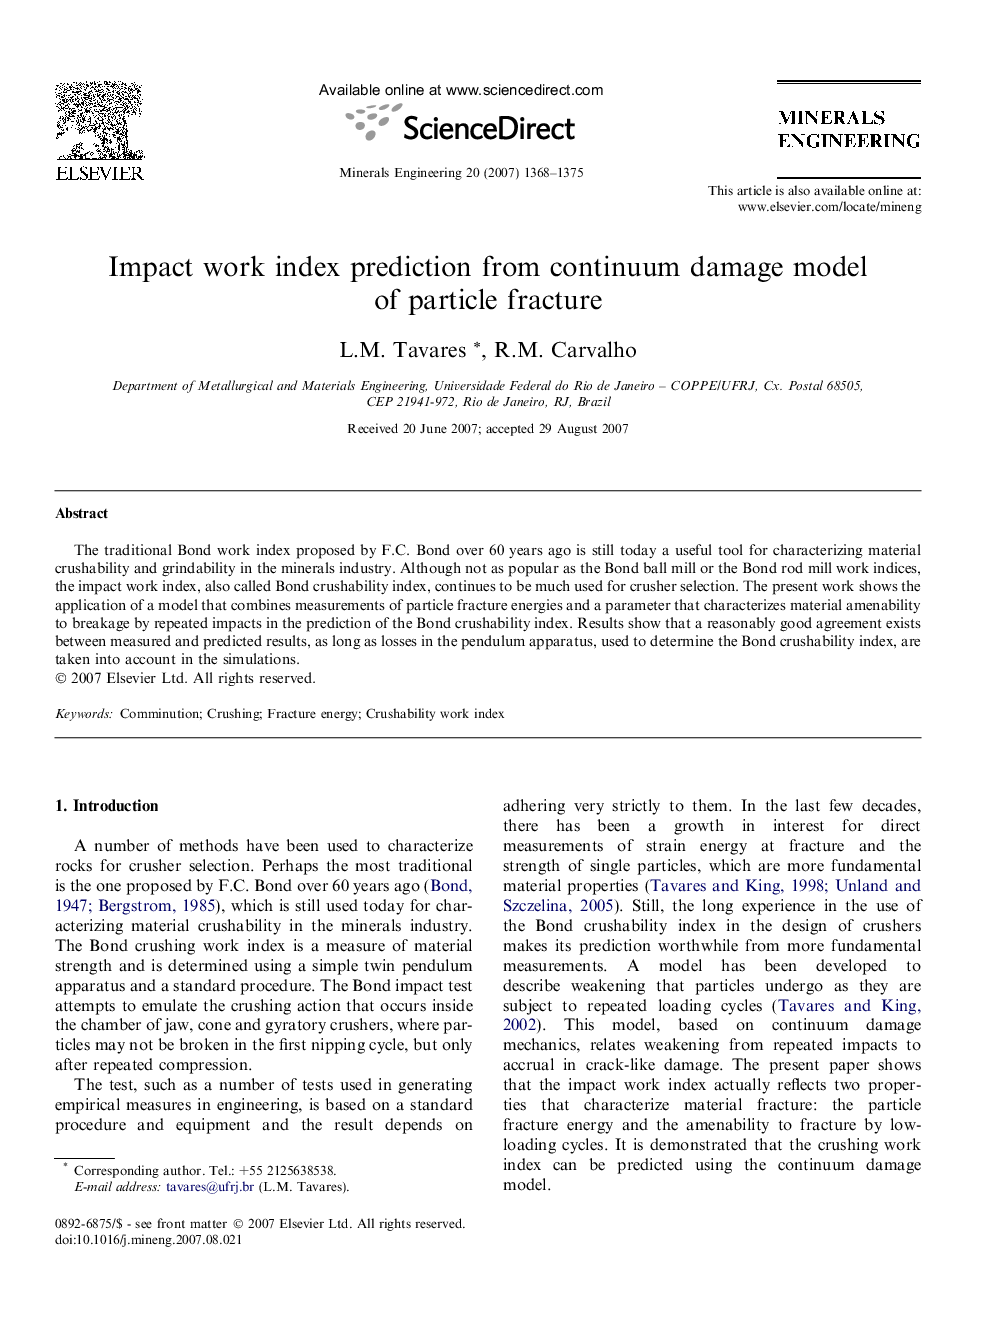 Impact work index prediction from continuum damage model of particle fracture